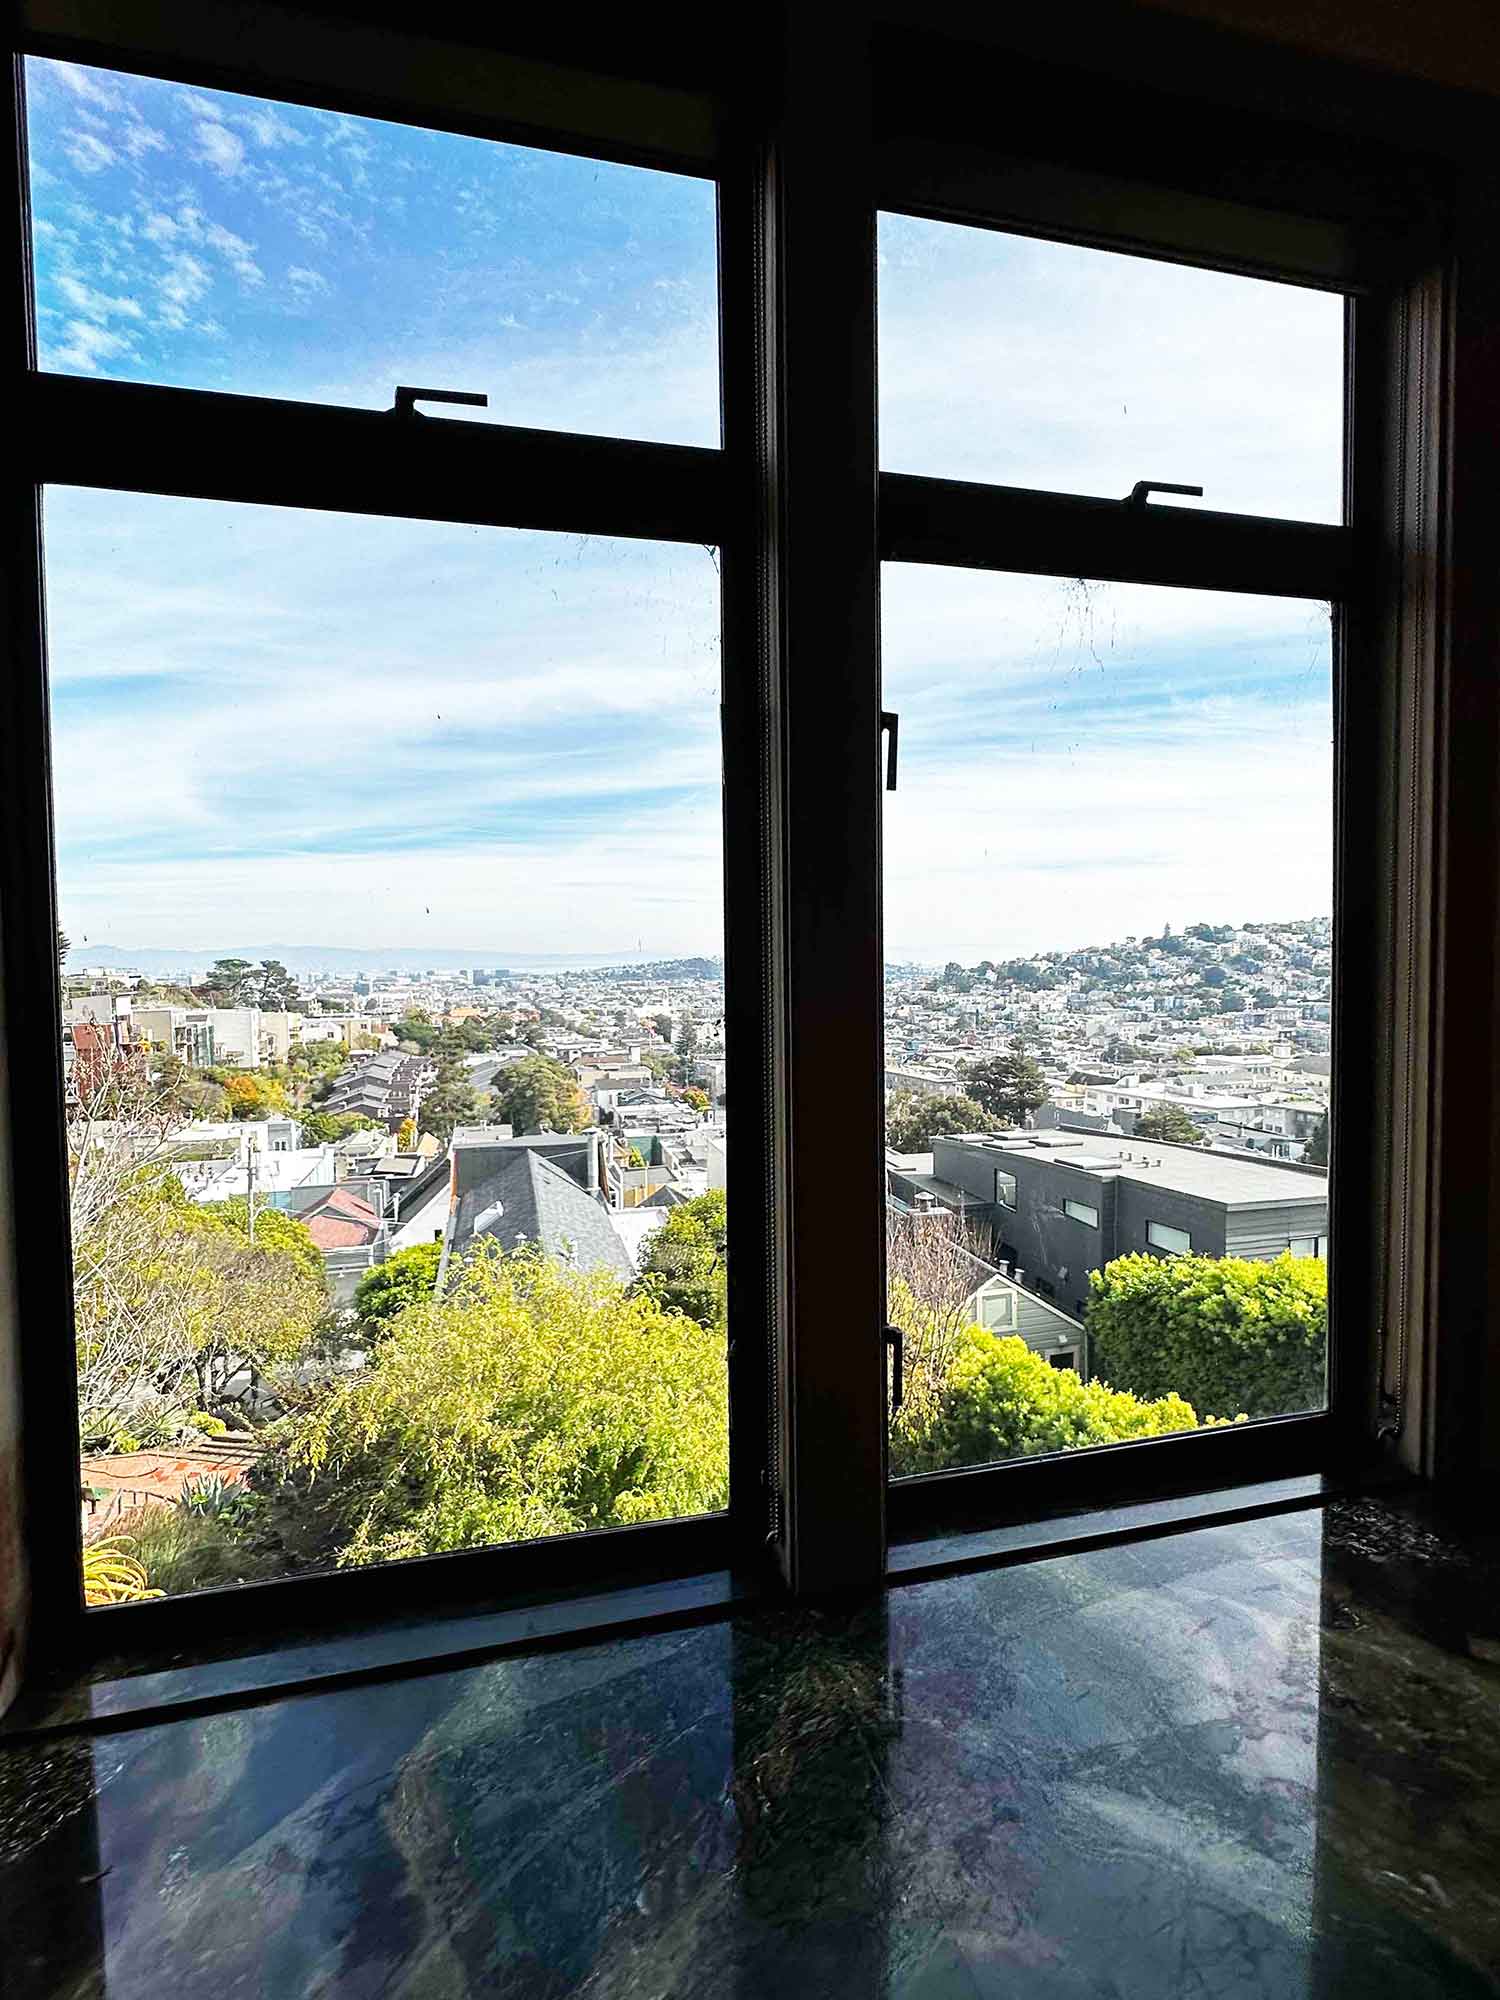 Can window film protect art from fading? Yes it can! We added window film to this art lover's home in San Francisco, CA.